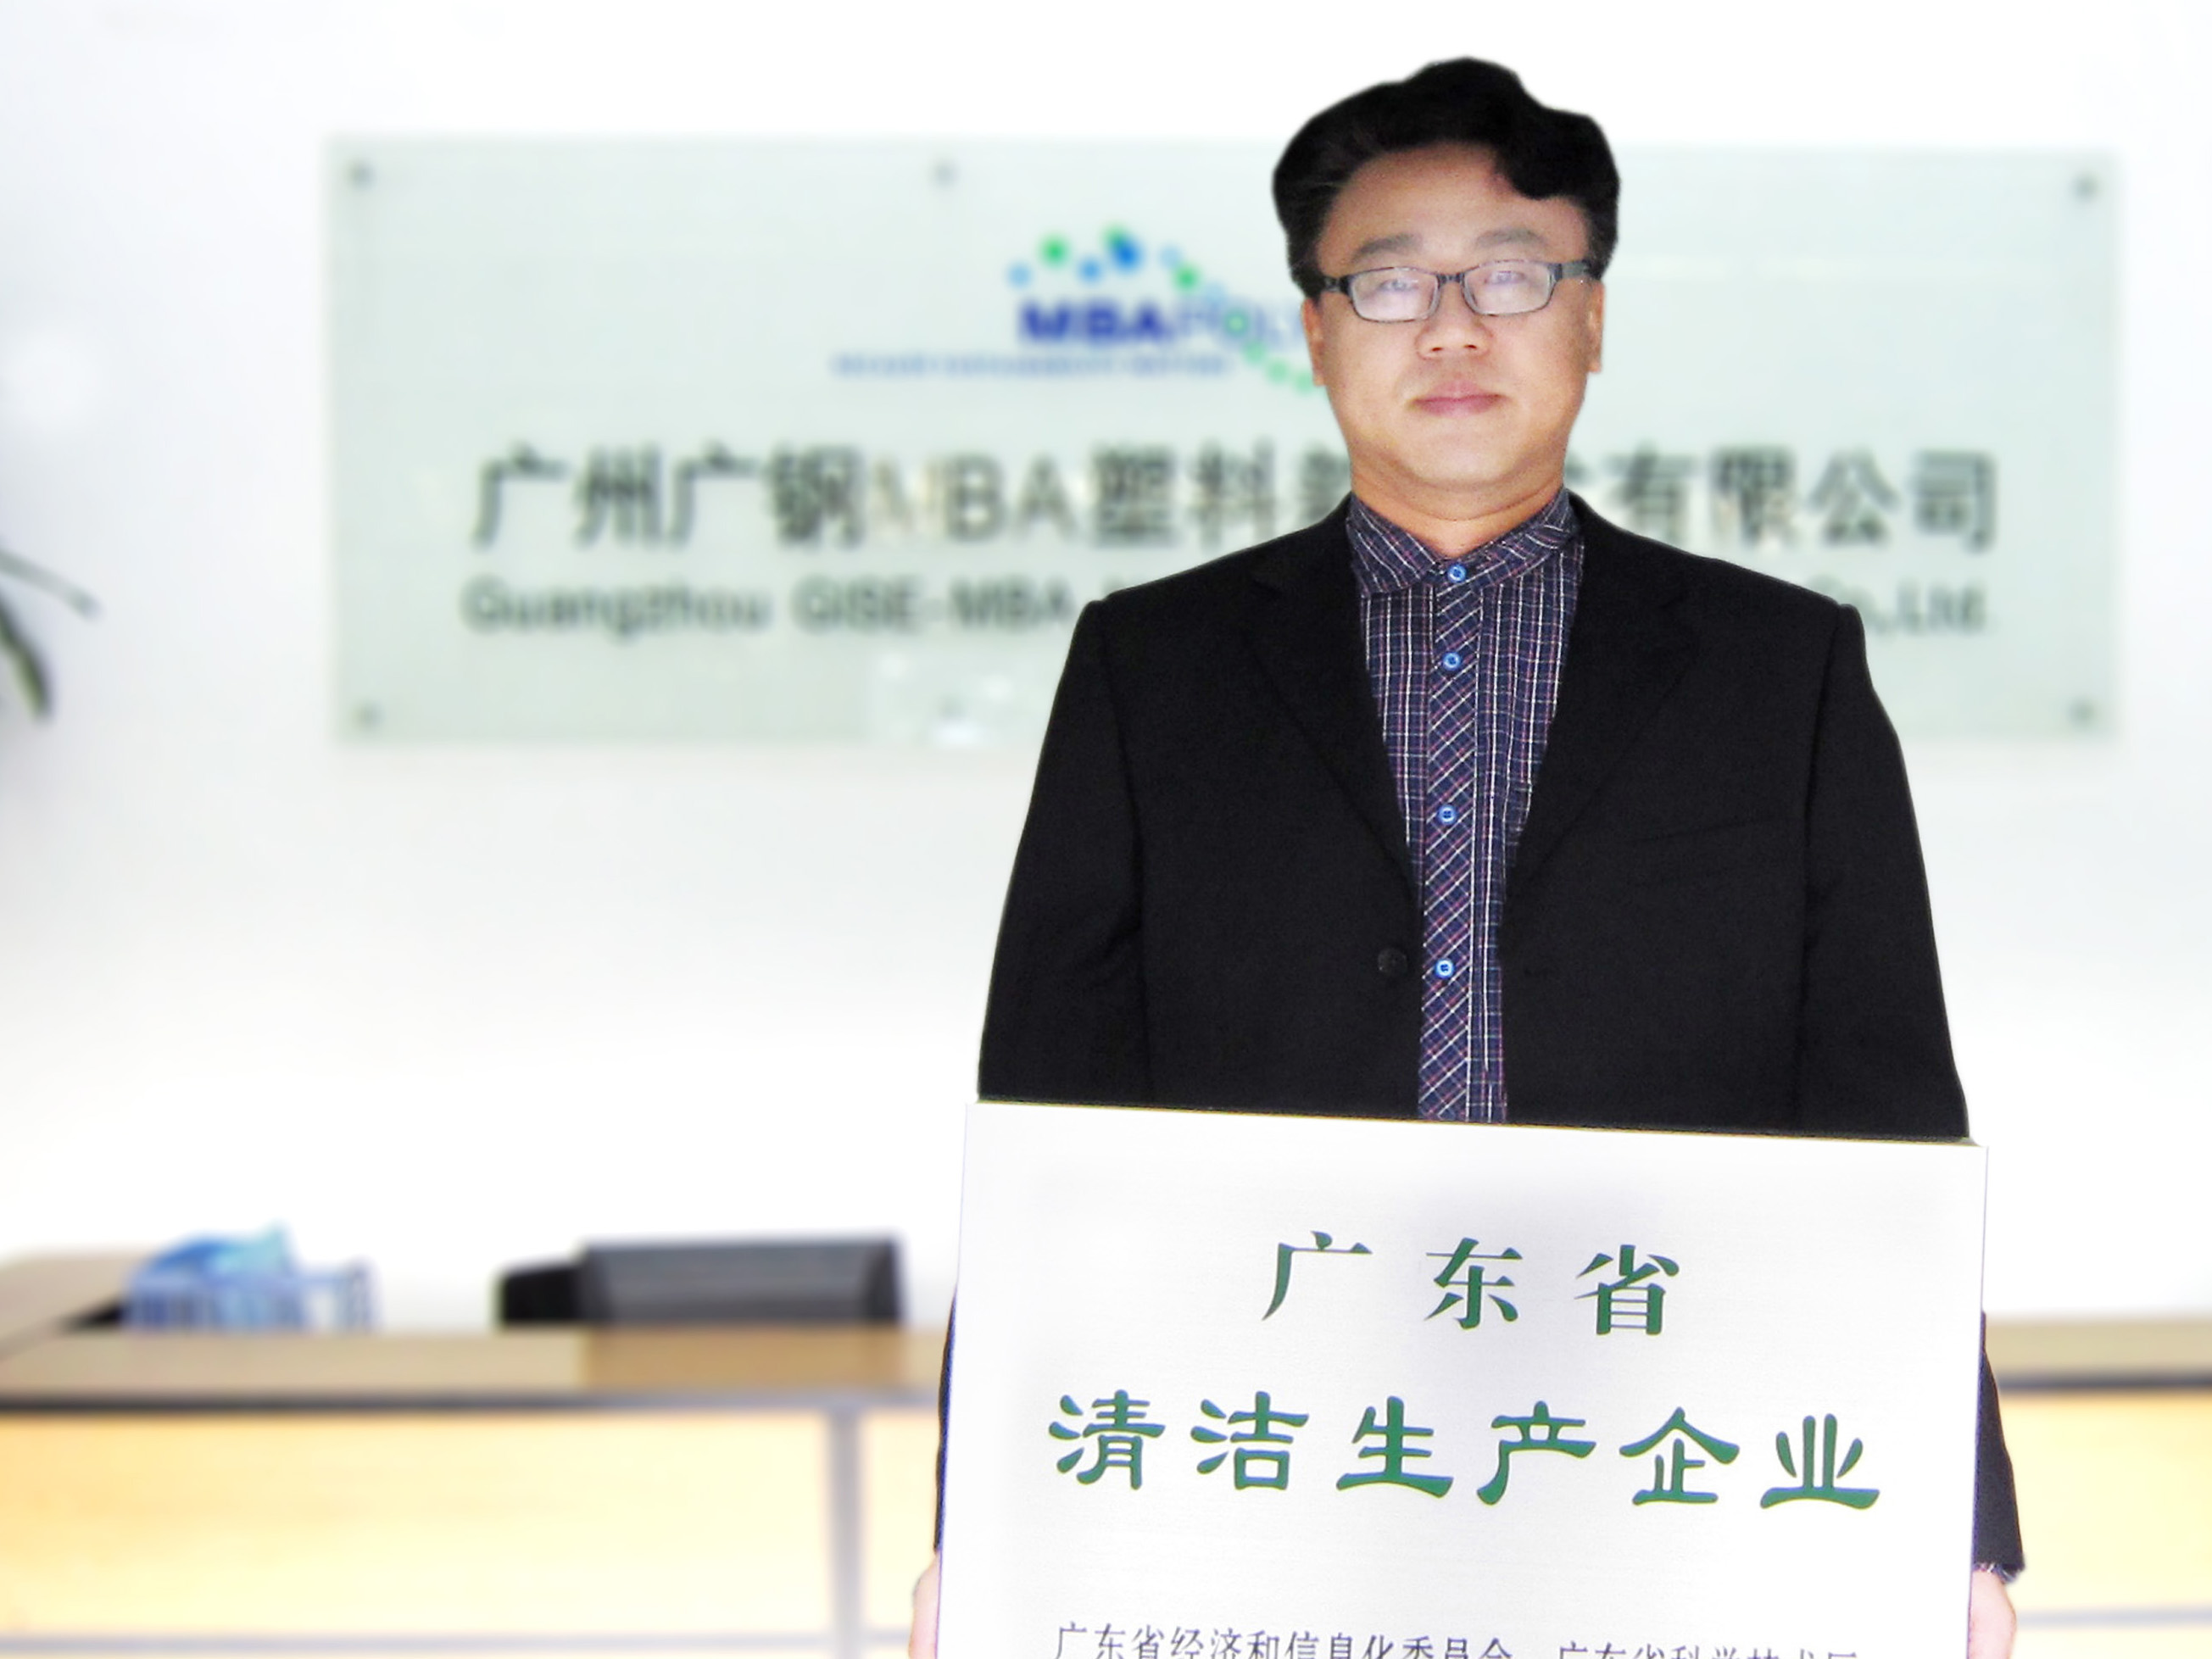 MBA Polymers China achieves recognition as the outstanding clean plant in Guangdong Province in 2012